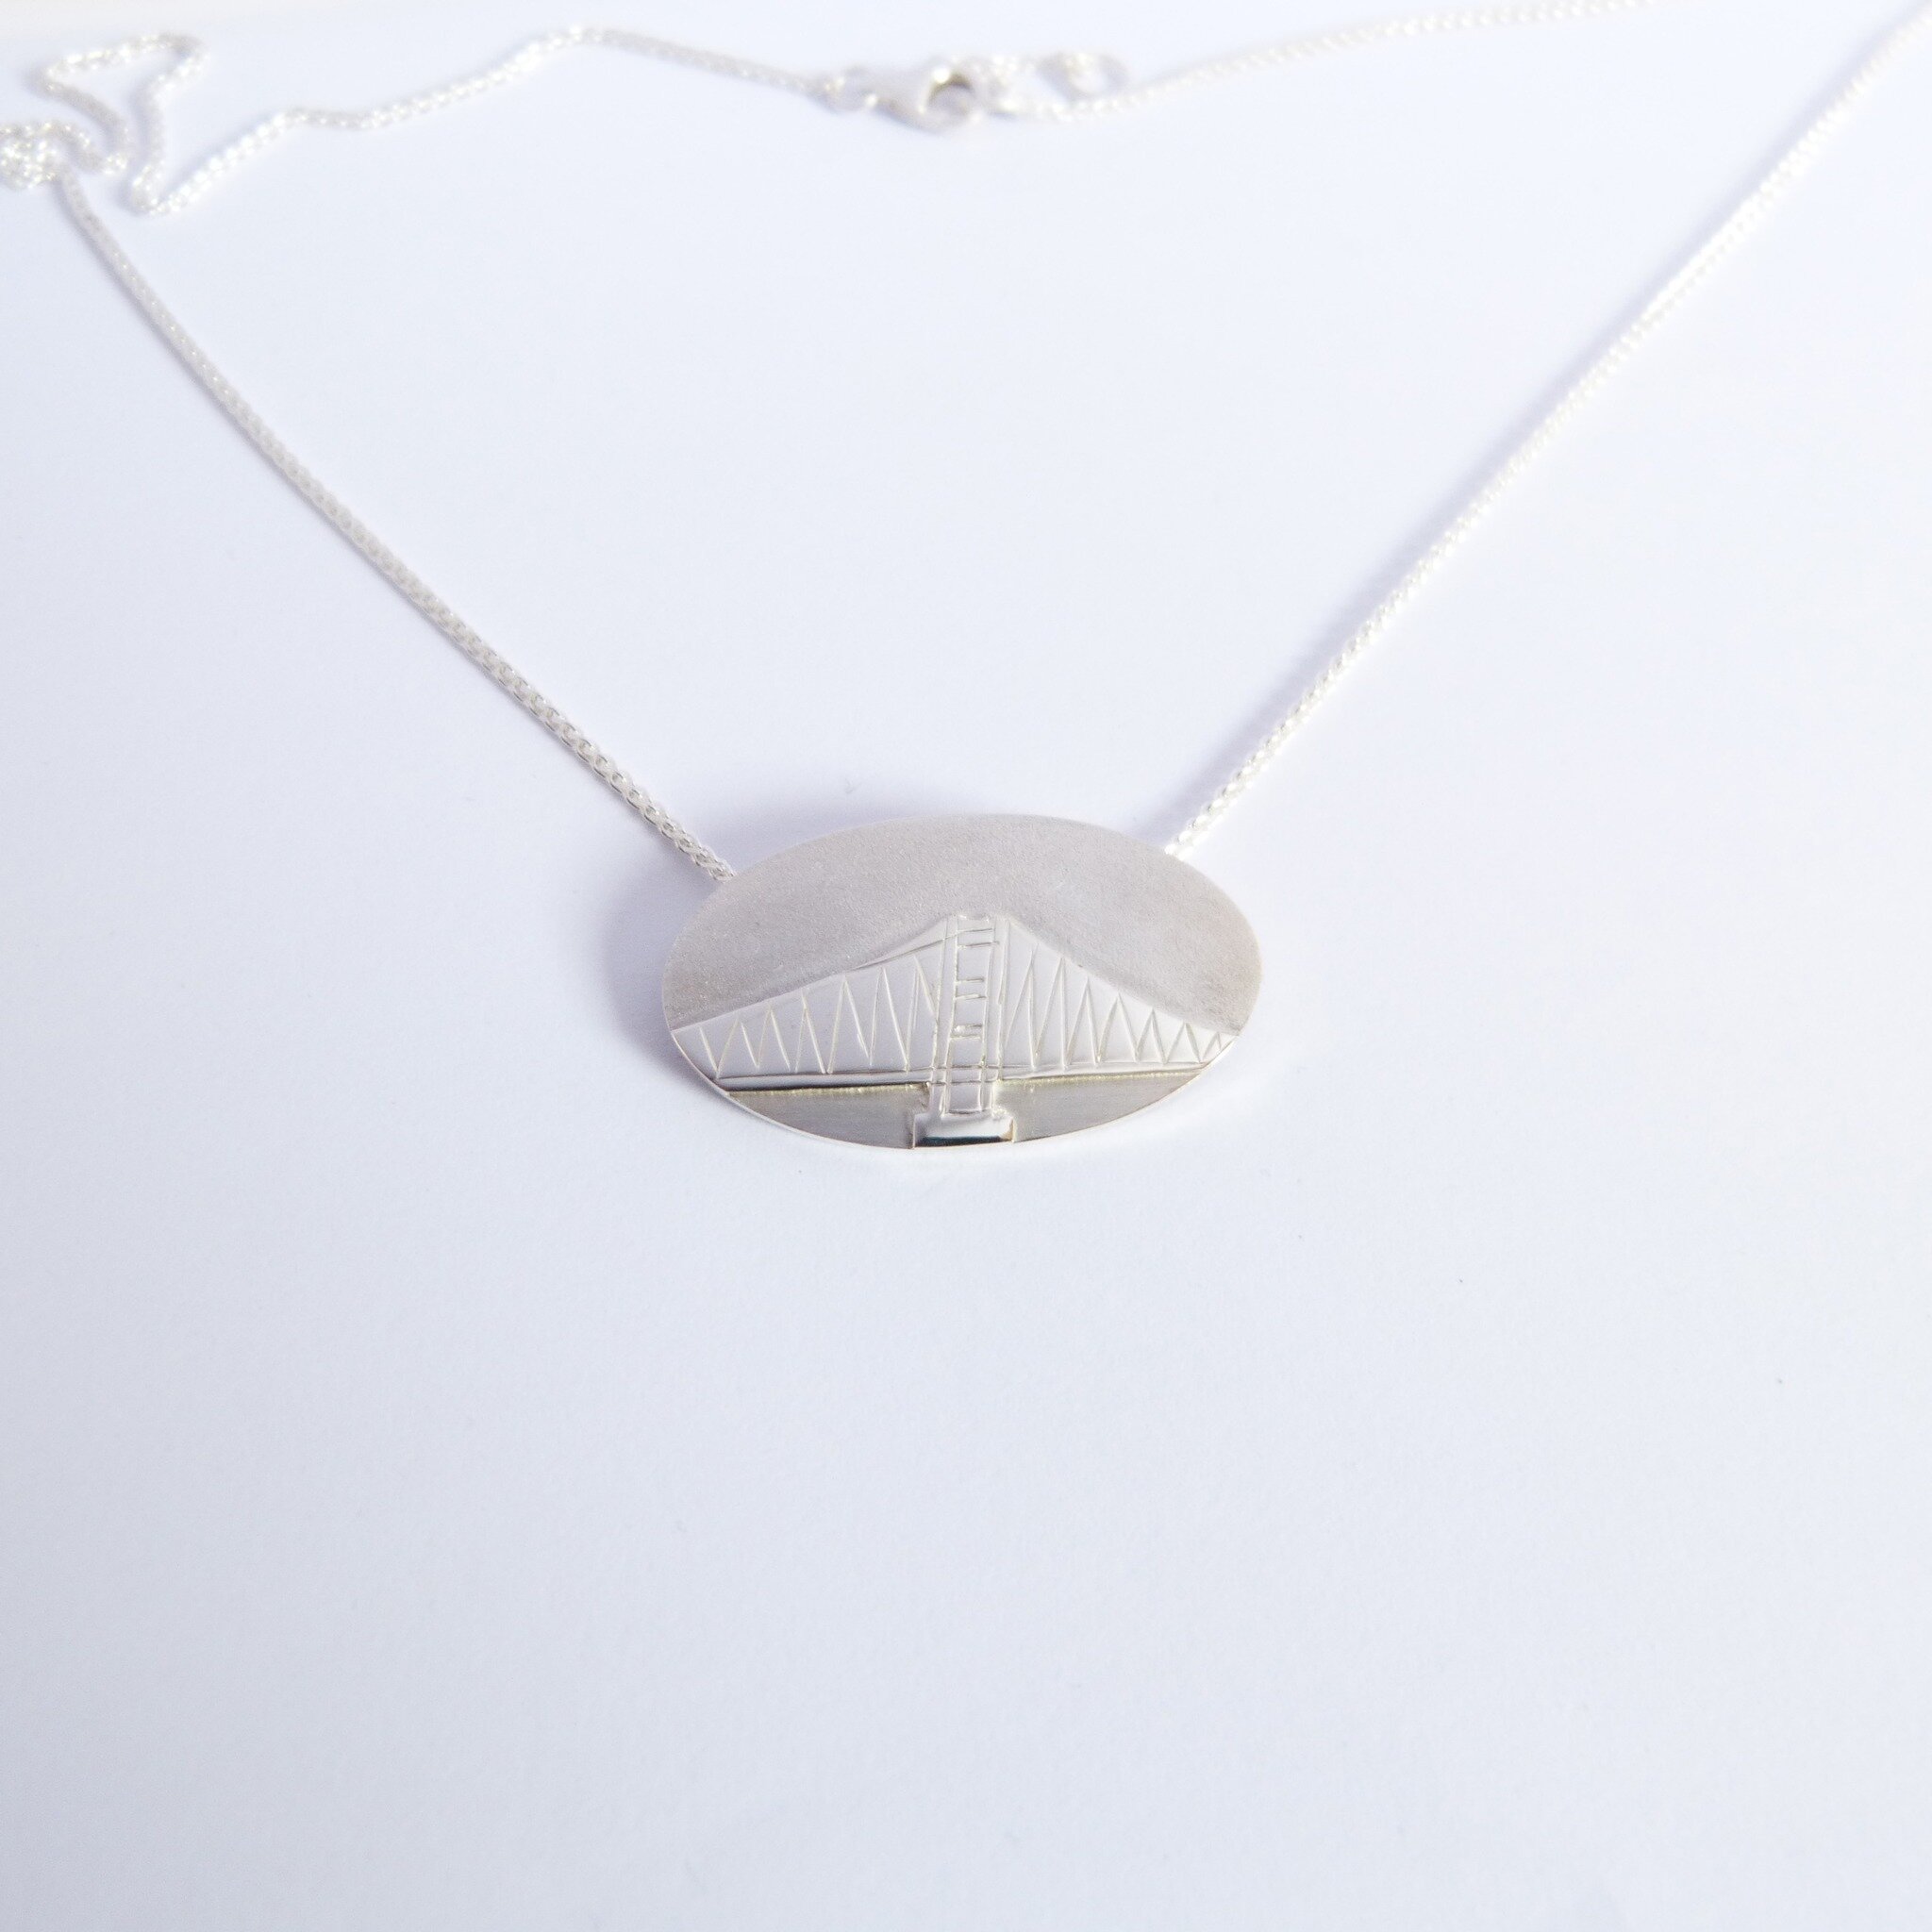 I may not be taking on new orders right now but jewellery is still being created and new pieces are leaving my studio on a weekly basis!
This Humber bridge necklace was commissioned by a previous wedding ring client of mine. This was a special birthd